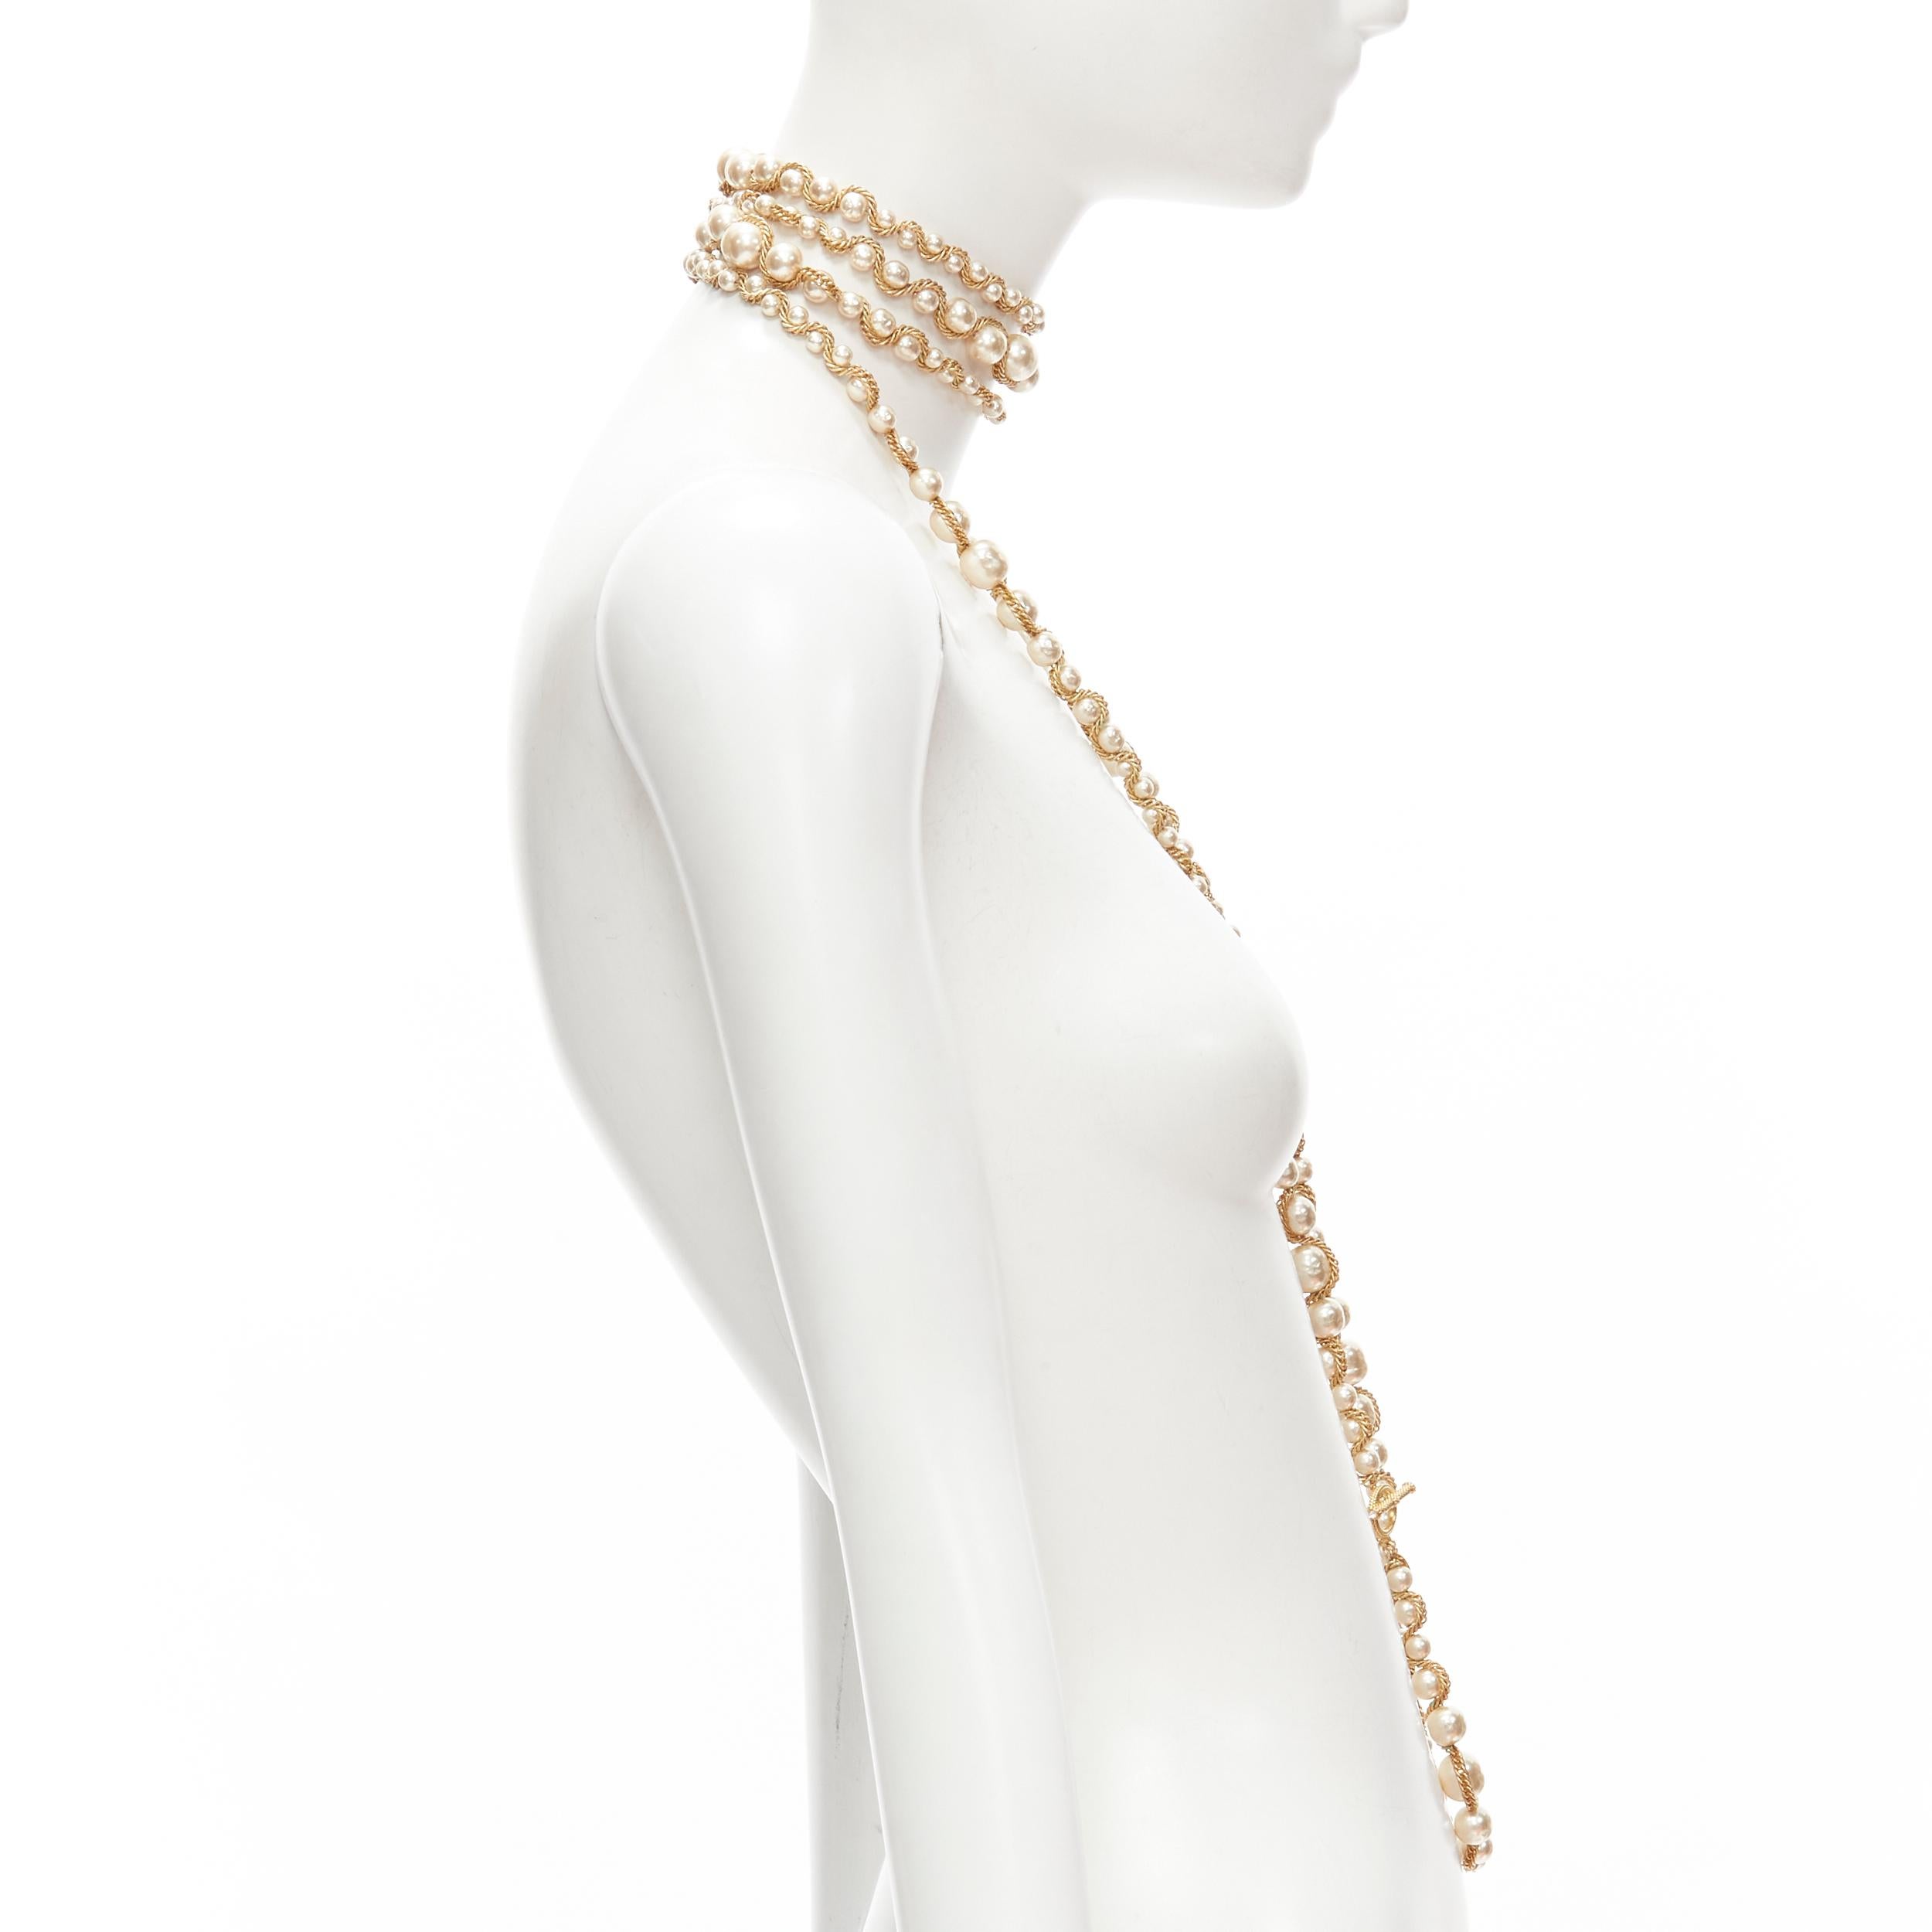 Women's MIRIAM HASKELL faux pearl gold chain branded Sautoir necklace